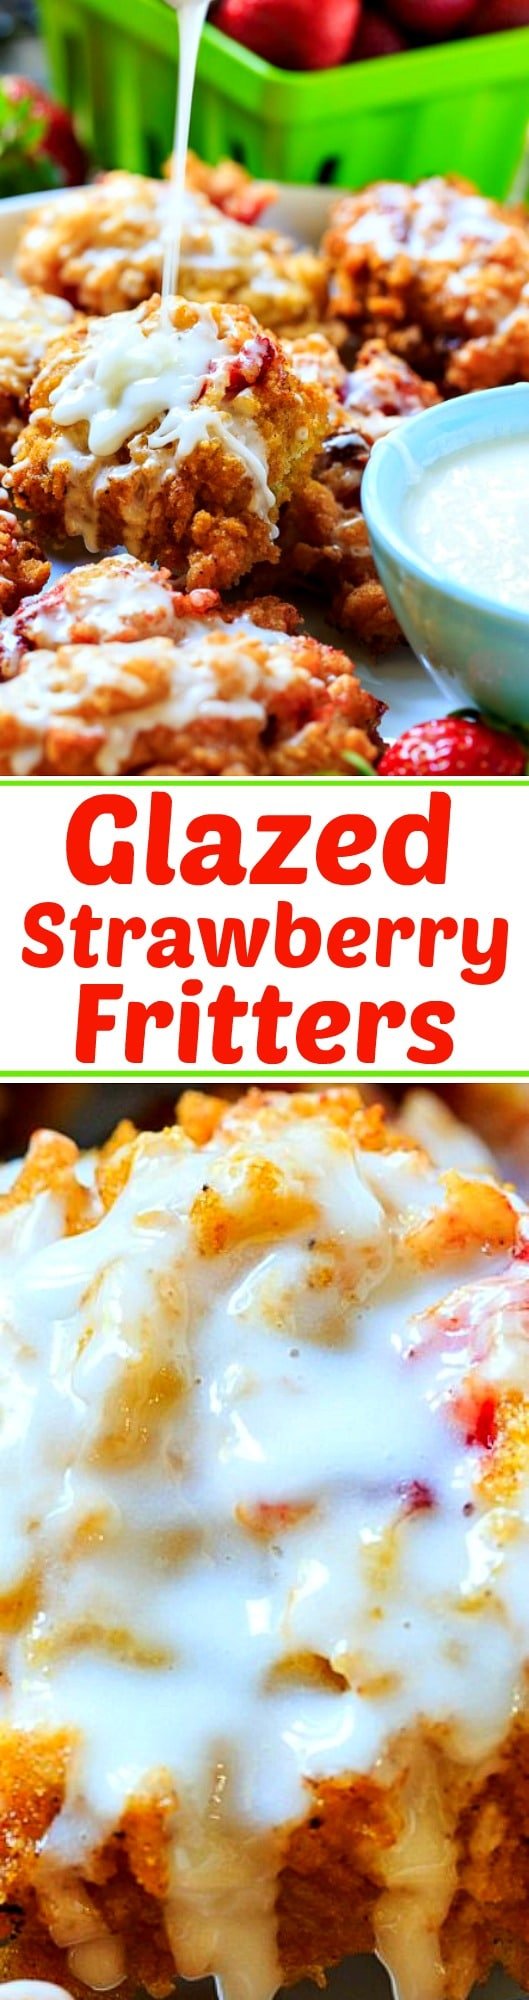 Glazed Strawberry Fritters made with fresh starwberries.